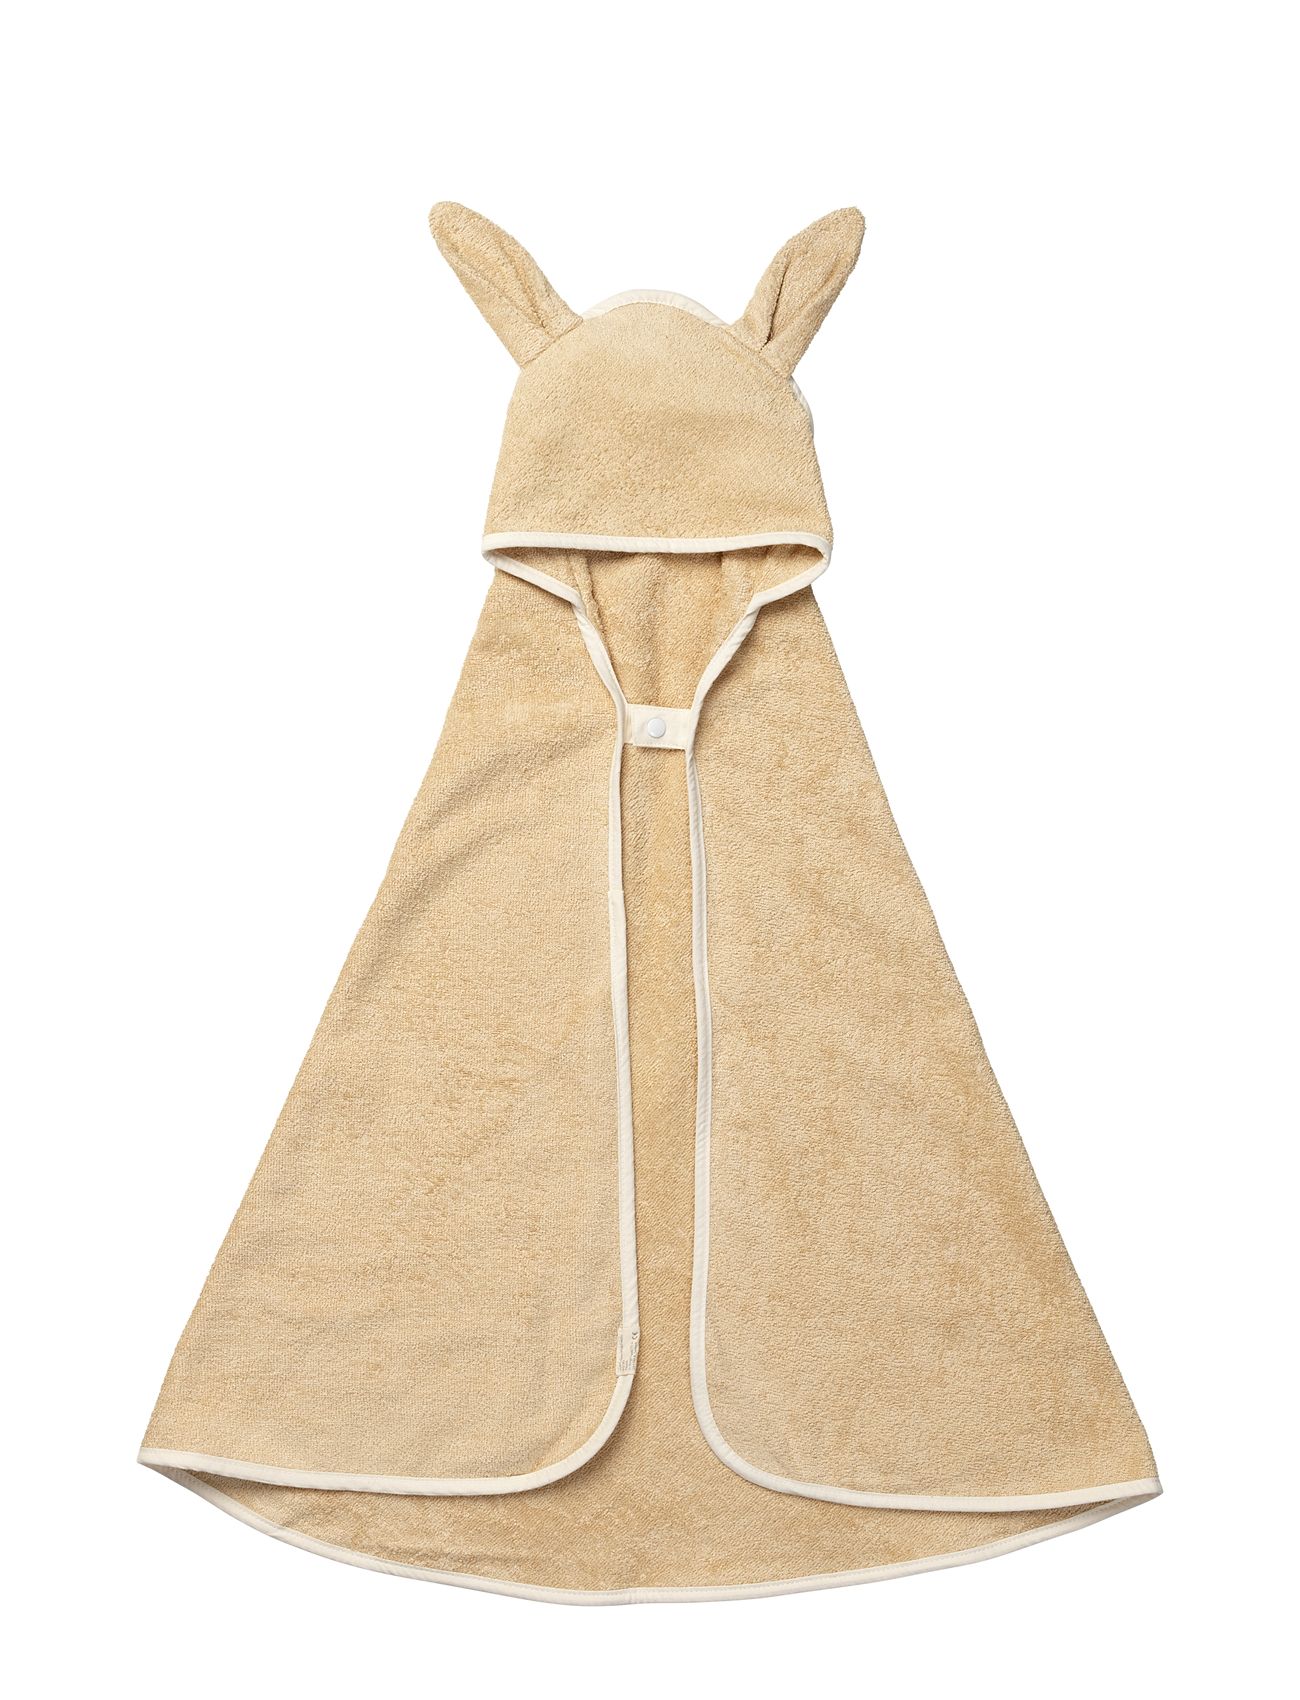 Hooded Baby Towel - Bunny - Wheat Home Bath Time Towels & Cloths Towels Beige Fabelab